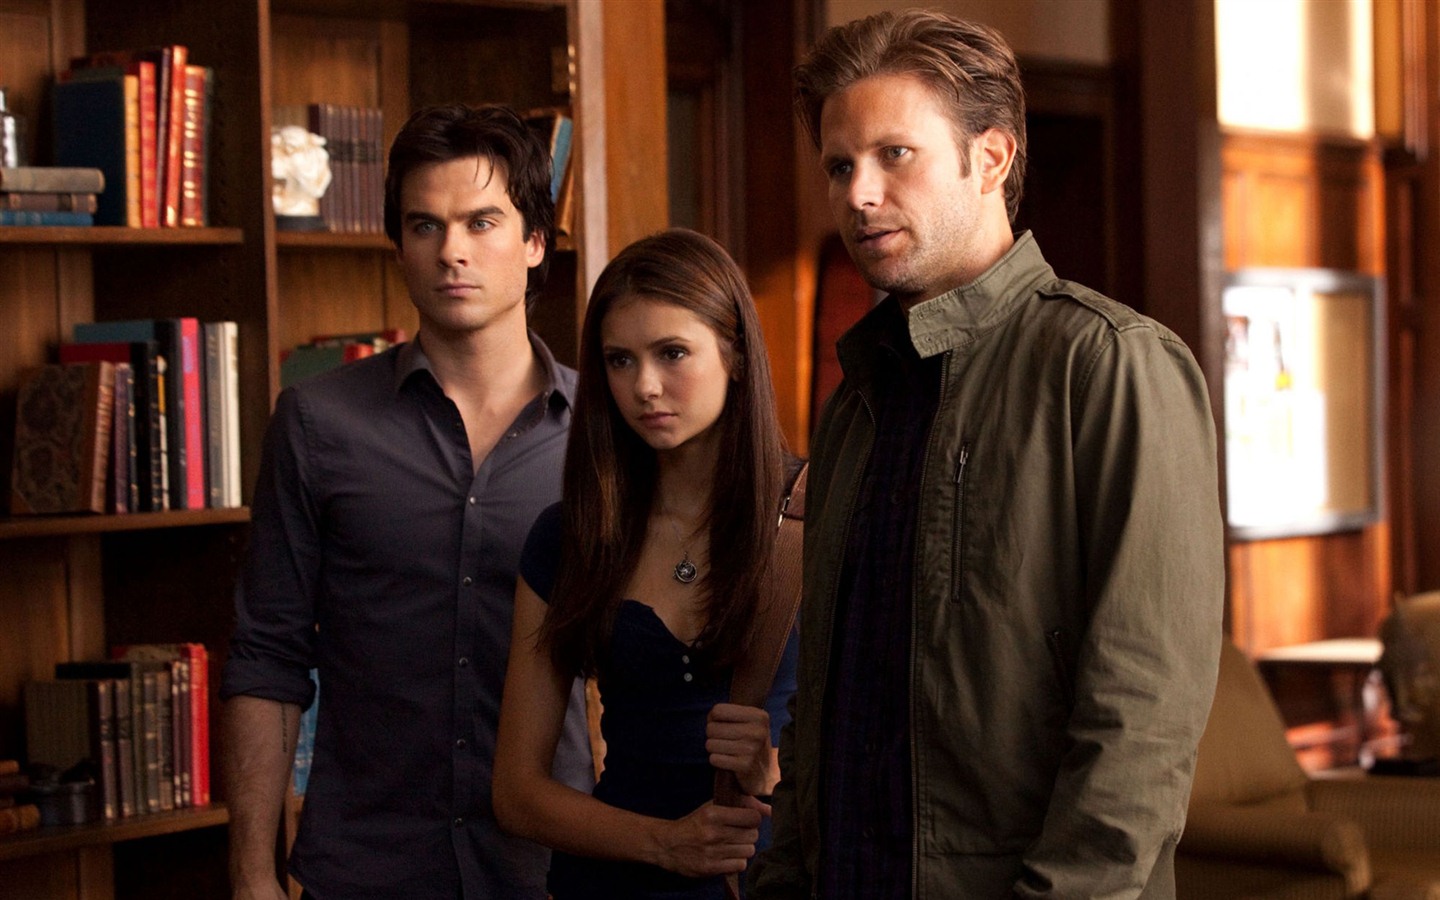 The Vampire Diaries wallpapers HD #2 - 1440x900